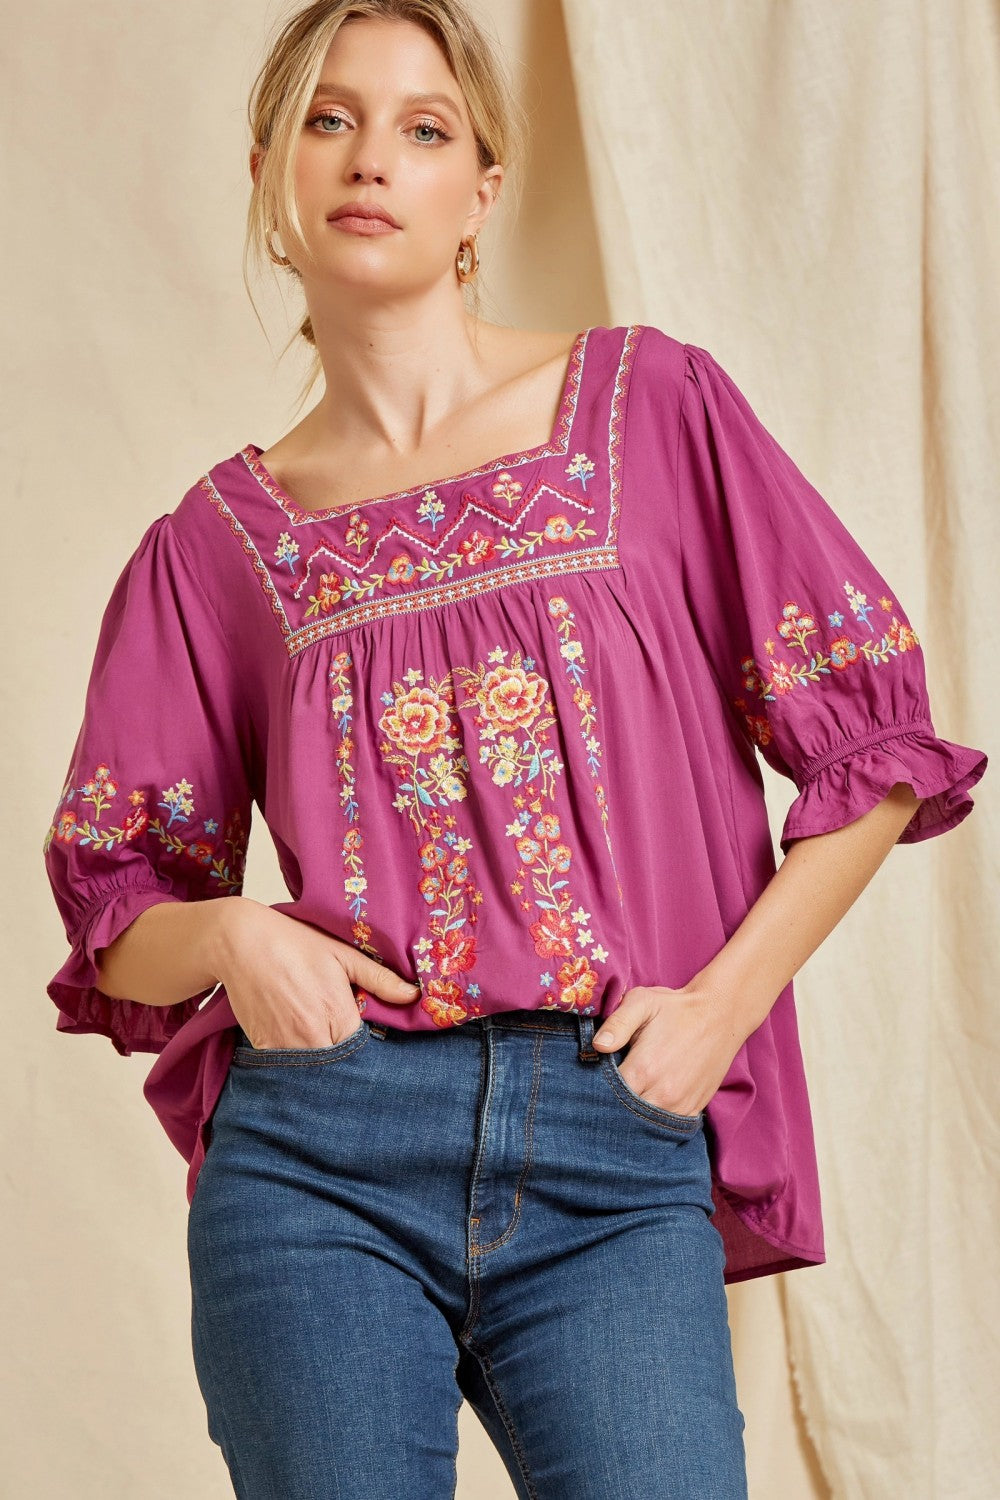 savanna jane / ANDREE BY UNIT Floral Embroidered Peasant Top